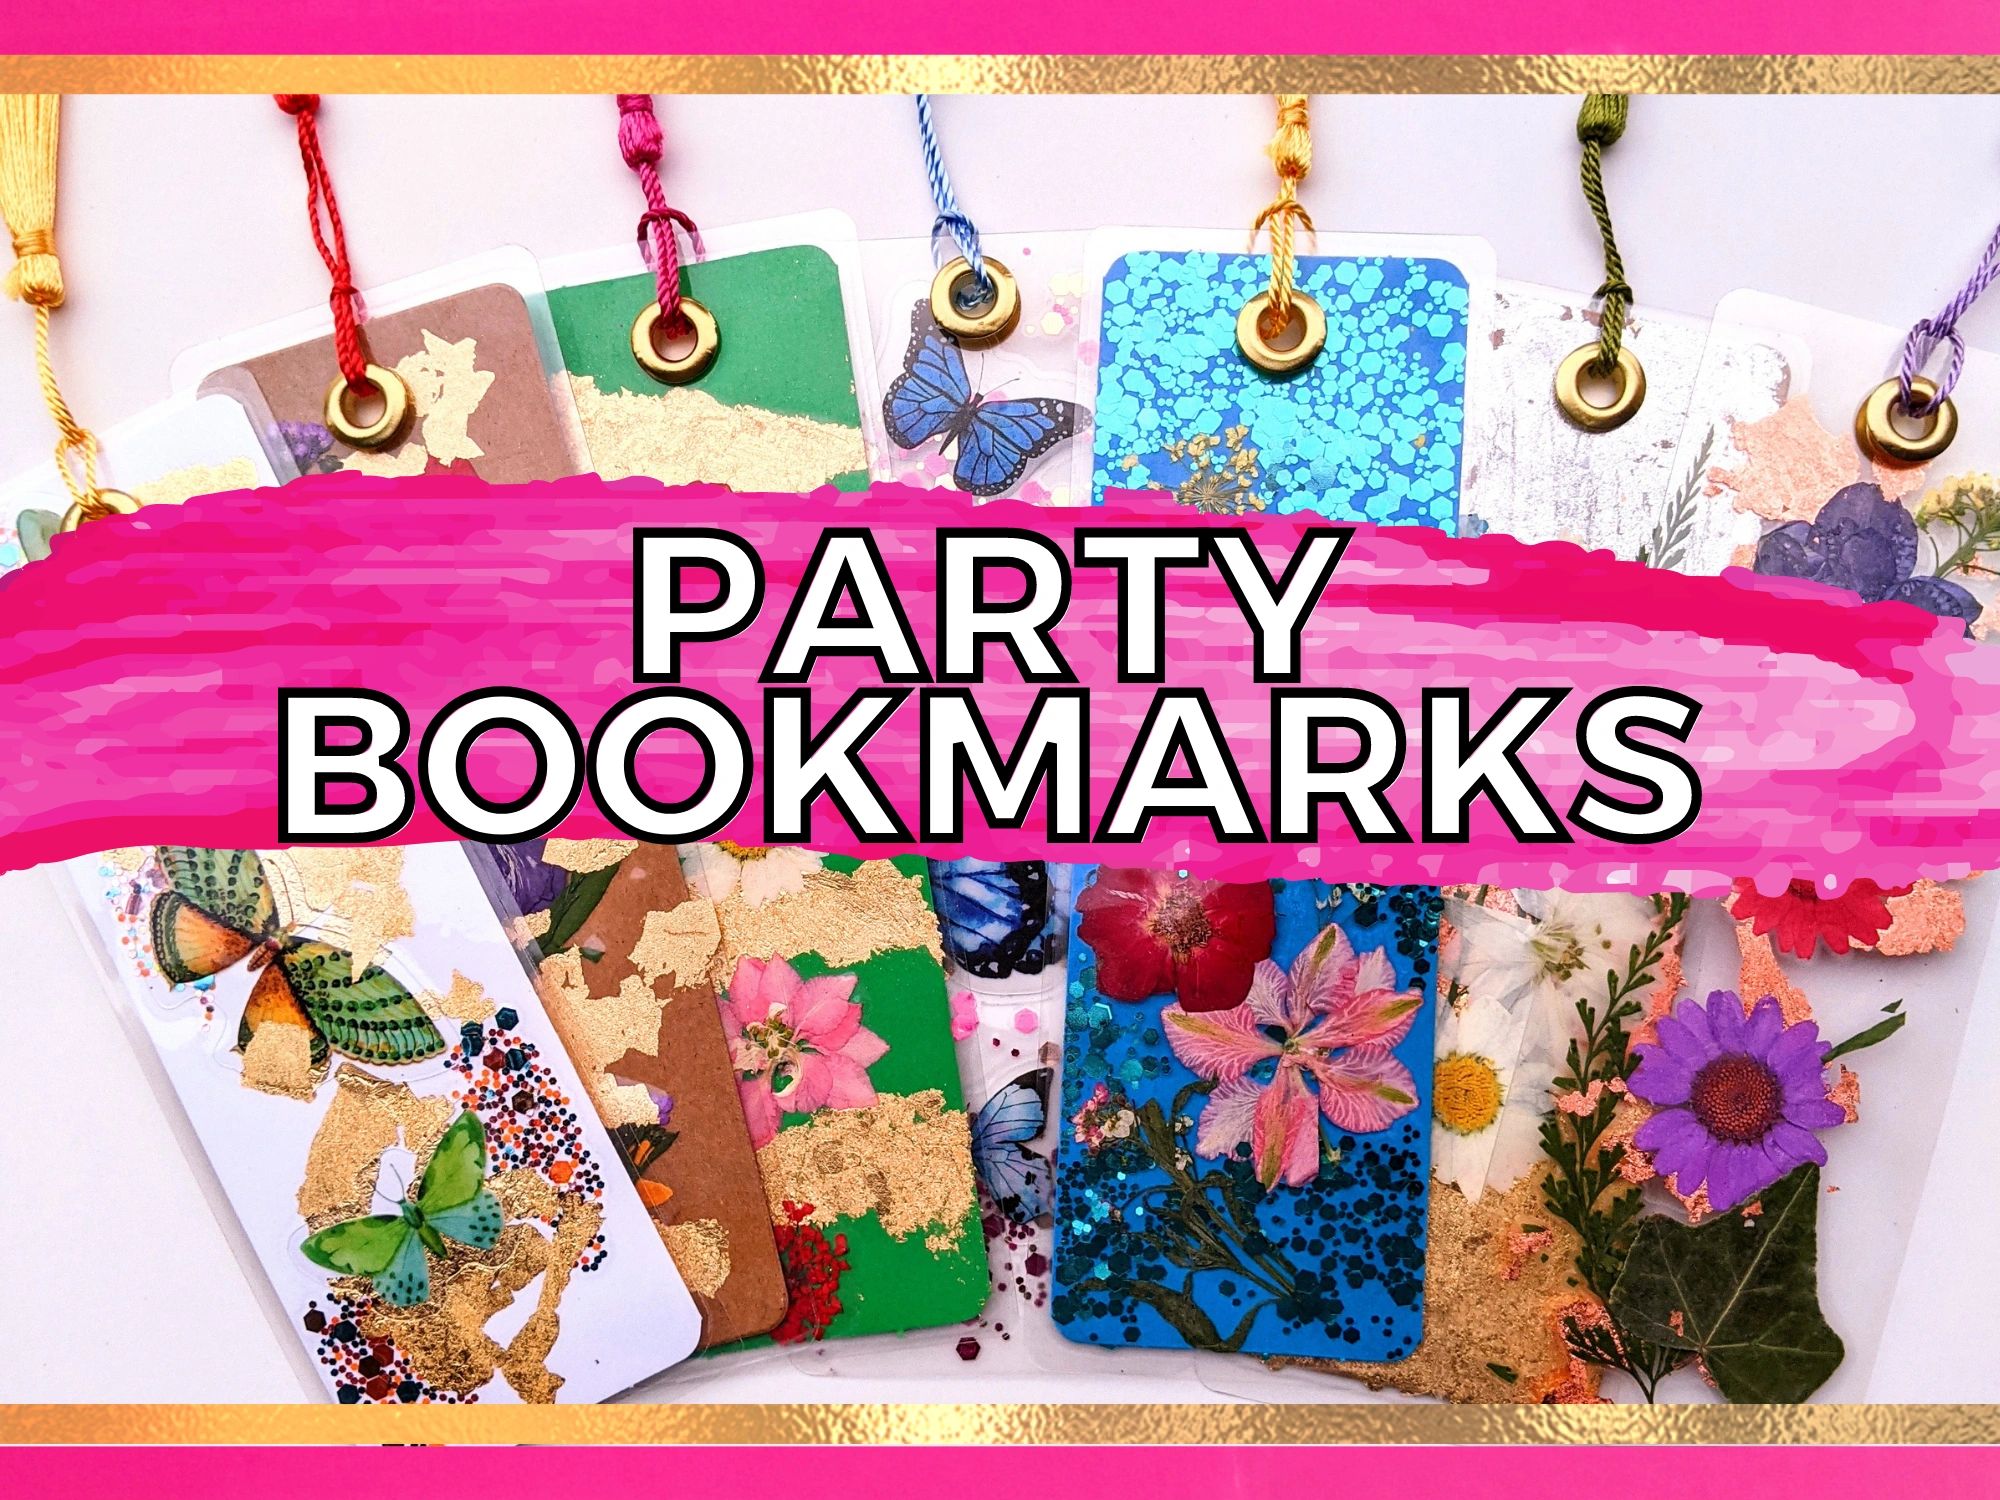 Party Bookmarks different styles